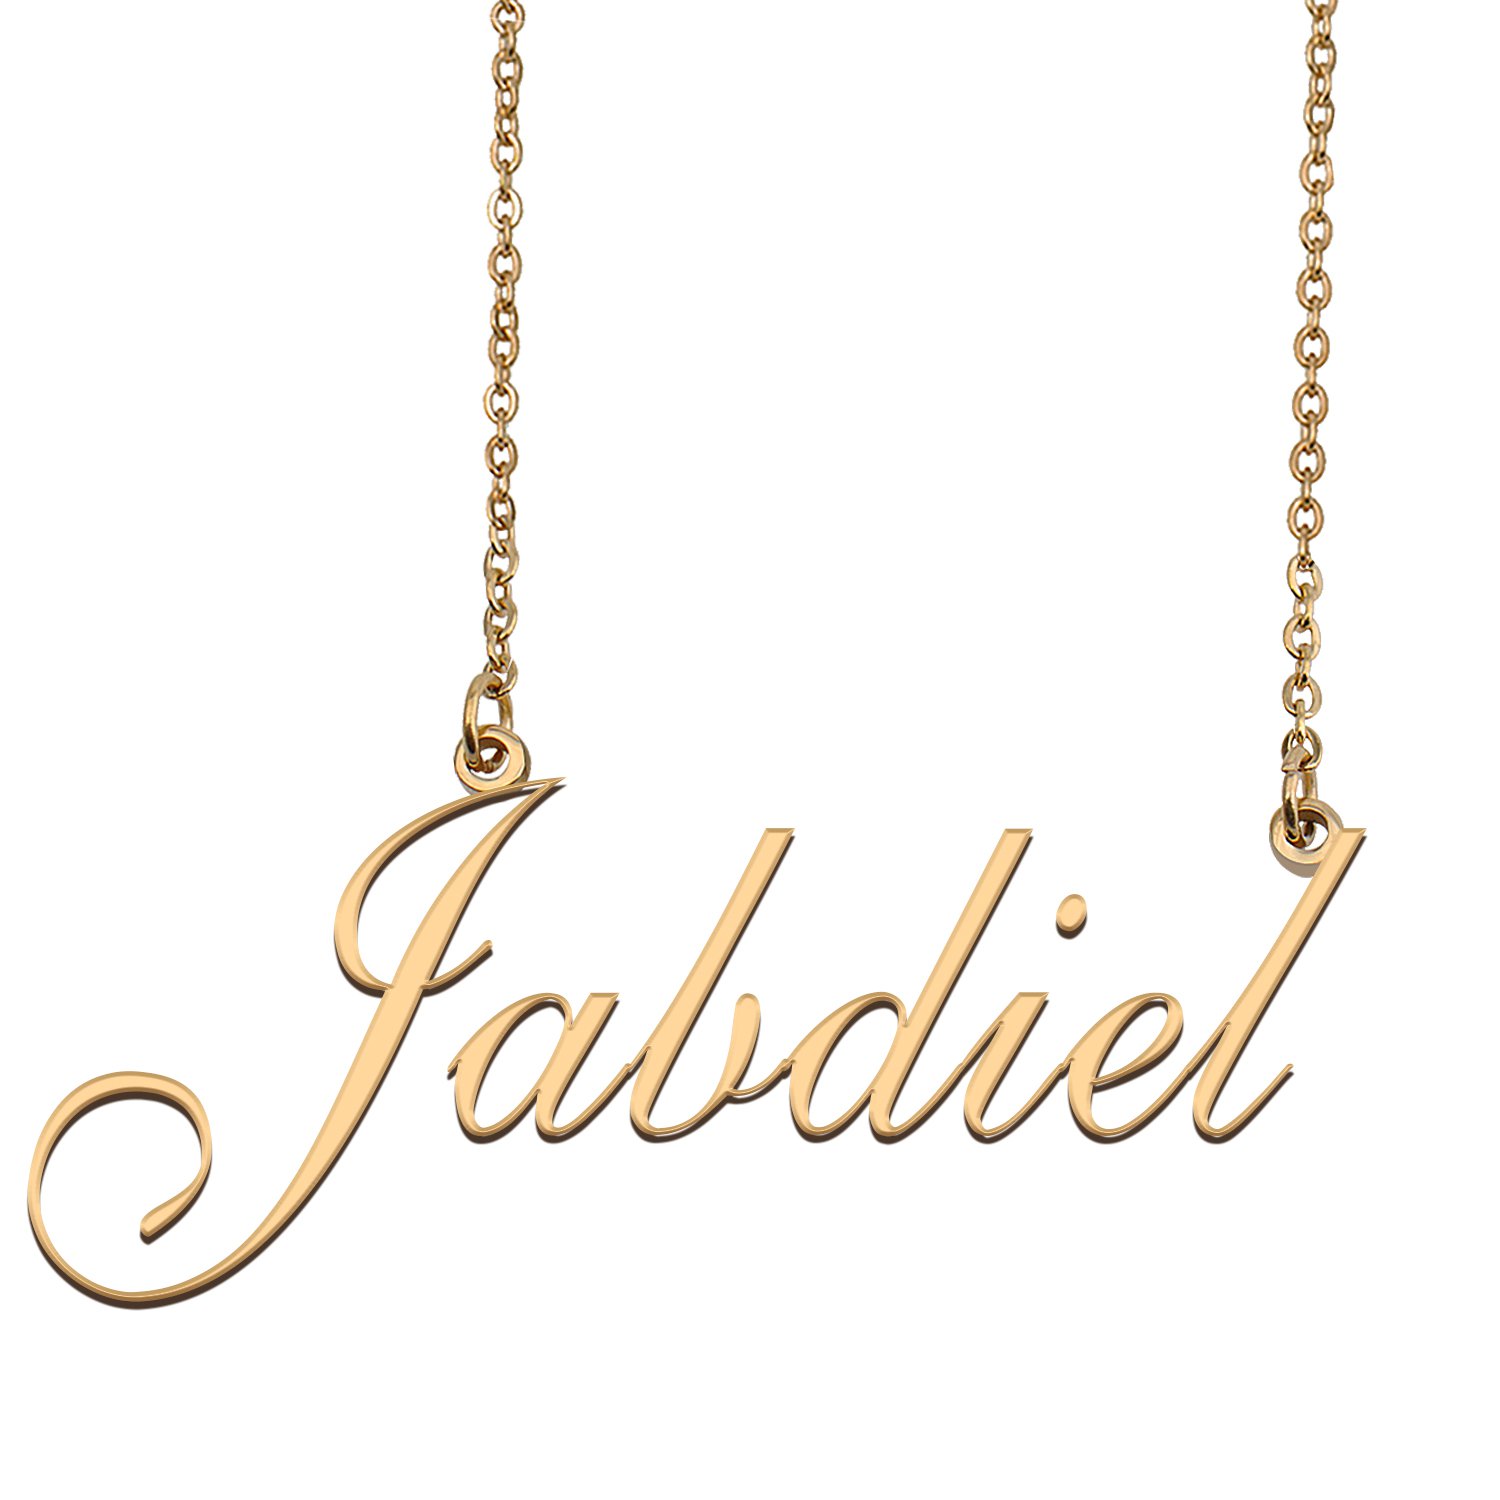 Personalized My Name Necklace Dainty personal Initial Necklace Jabdiel